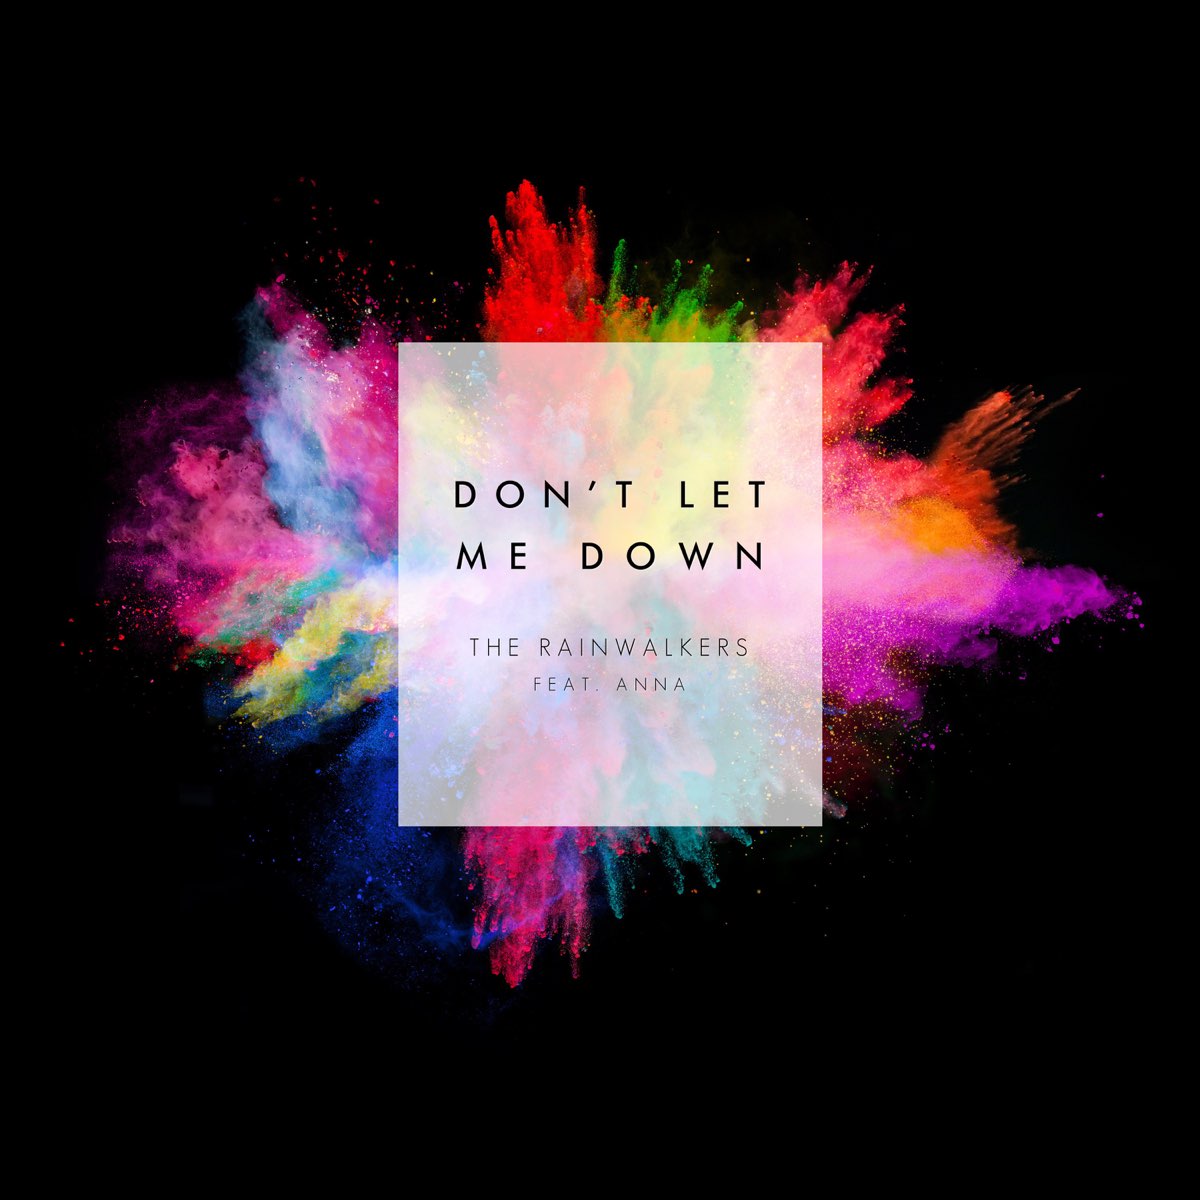 Don`t Let me down. The Chainsmokers don't Let me down. The Chainsmokers don't Let me down обложка. Don't Let me down Daya обложка. The chainsmokers feat daya